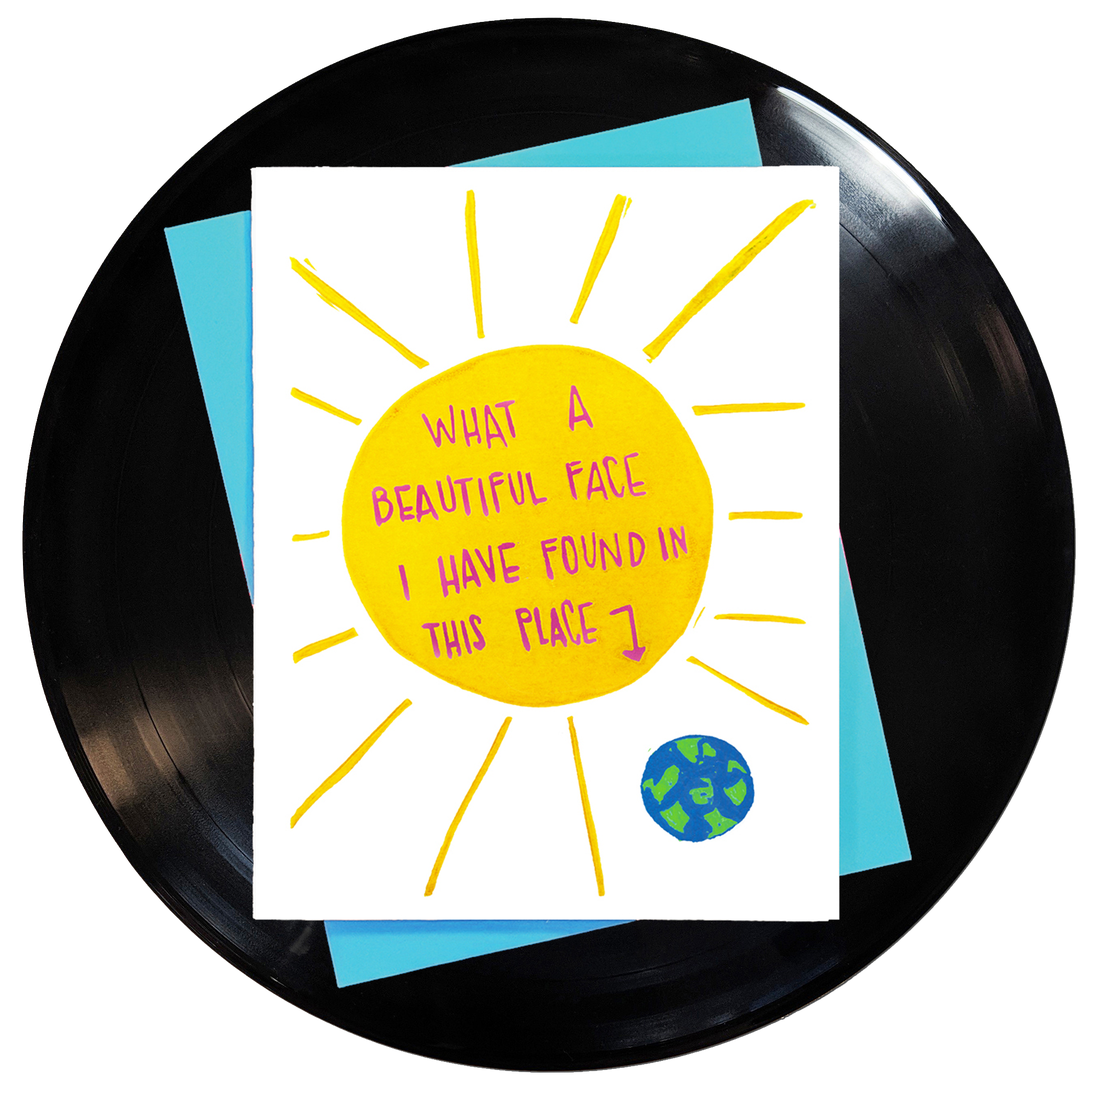 4.25" x 5.5" card What A Beautiful Face I Have Found In This Place pink text on bright yellow sun little planet earth stamped image white background